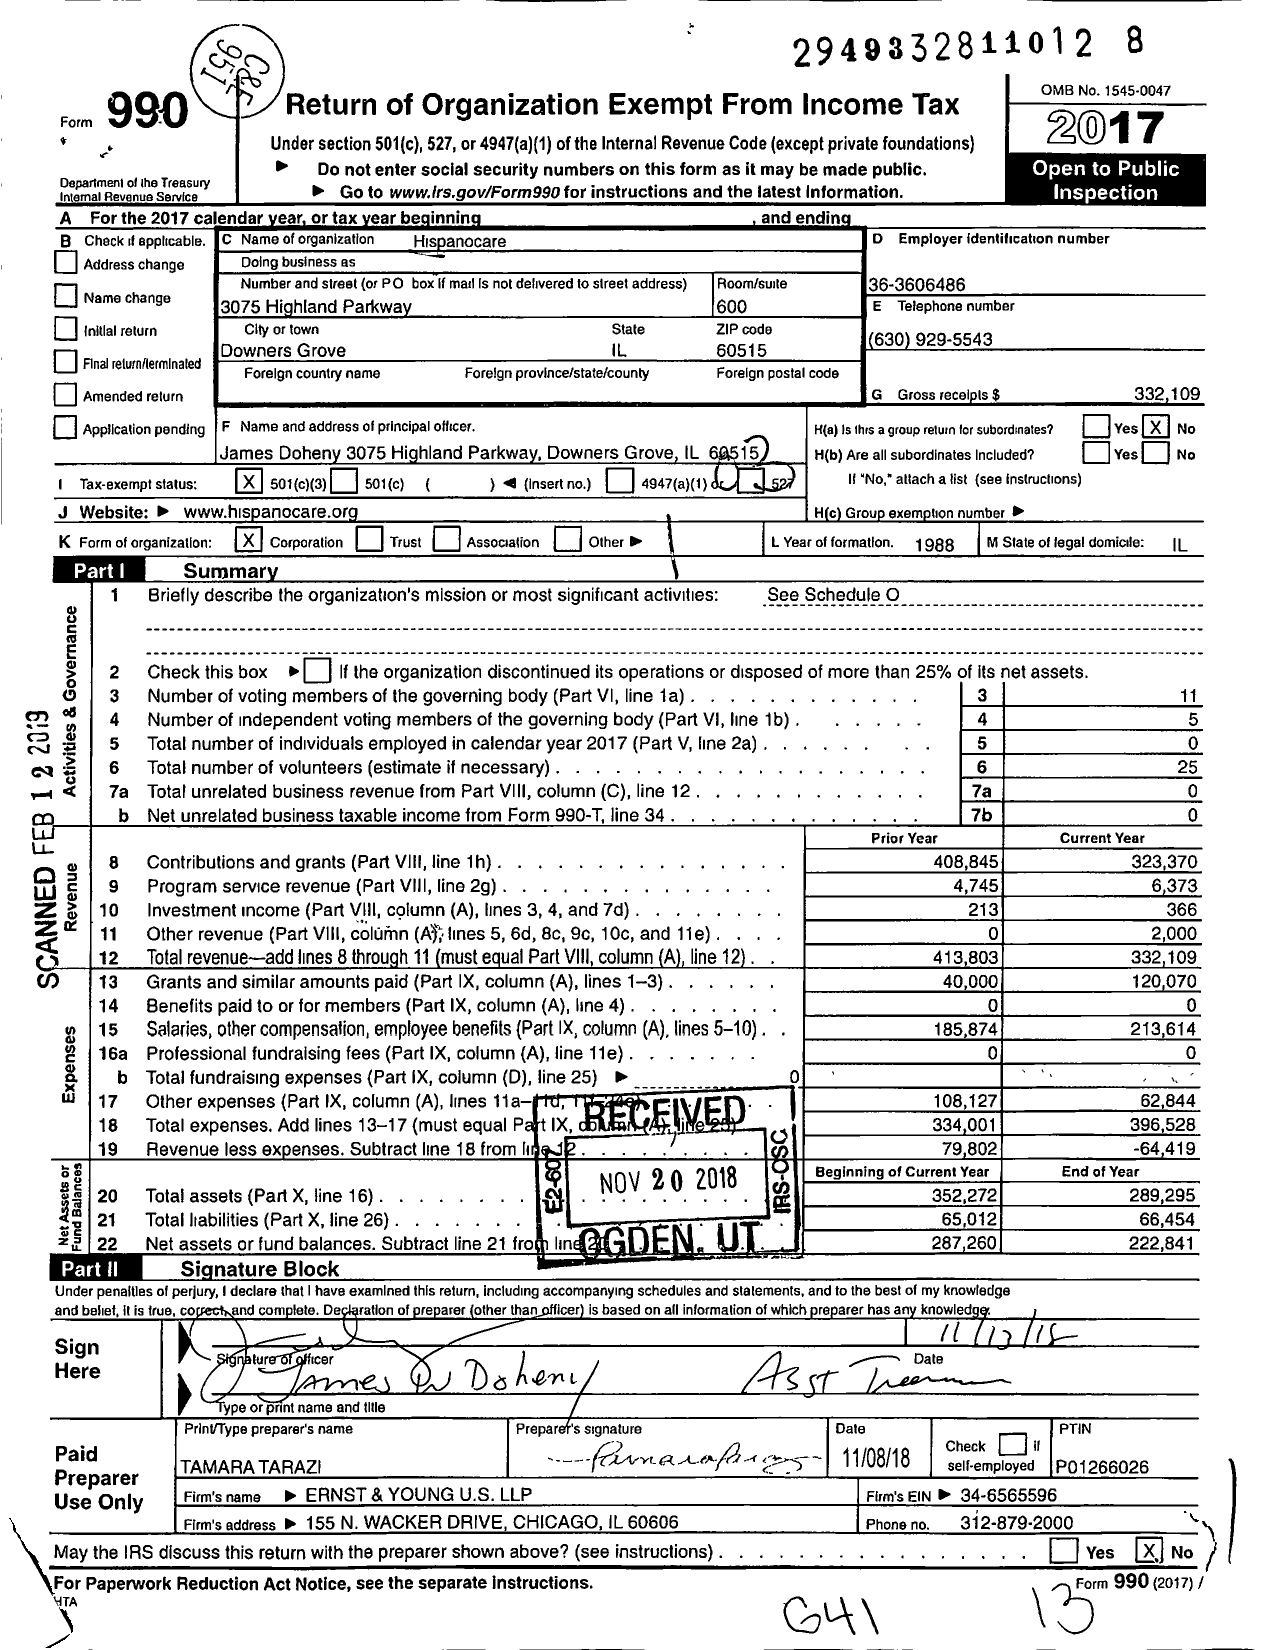 Image of first page of 2017 Form 990 for Hispanocare